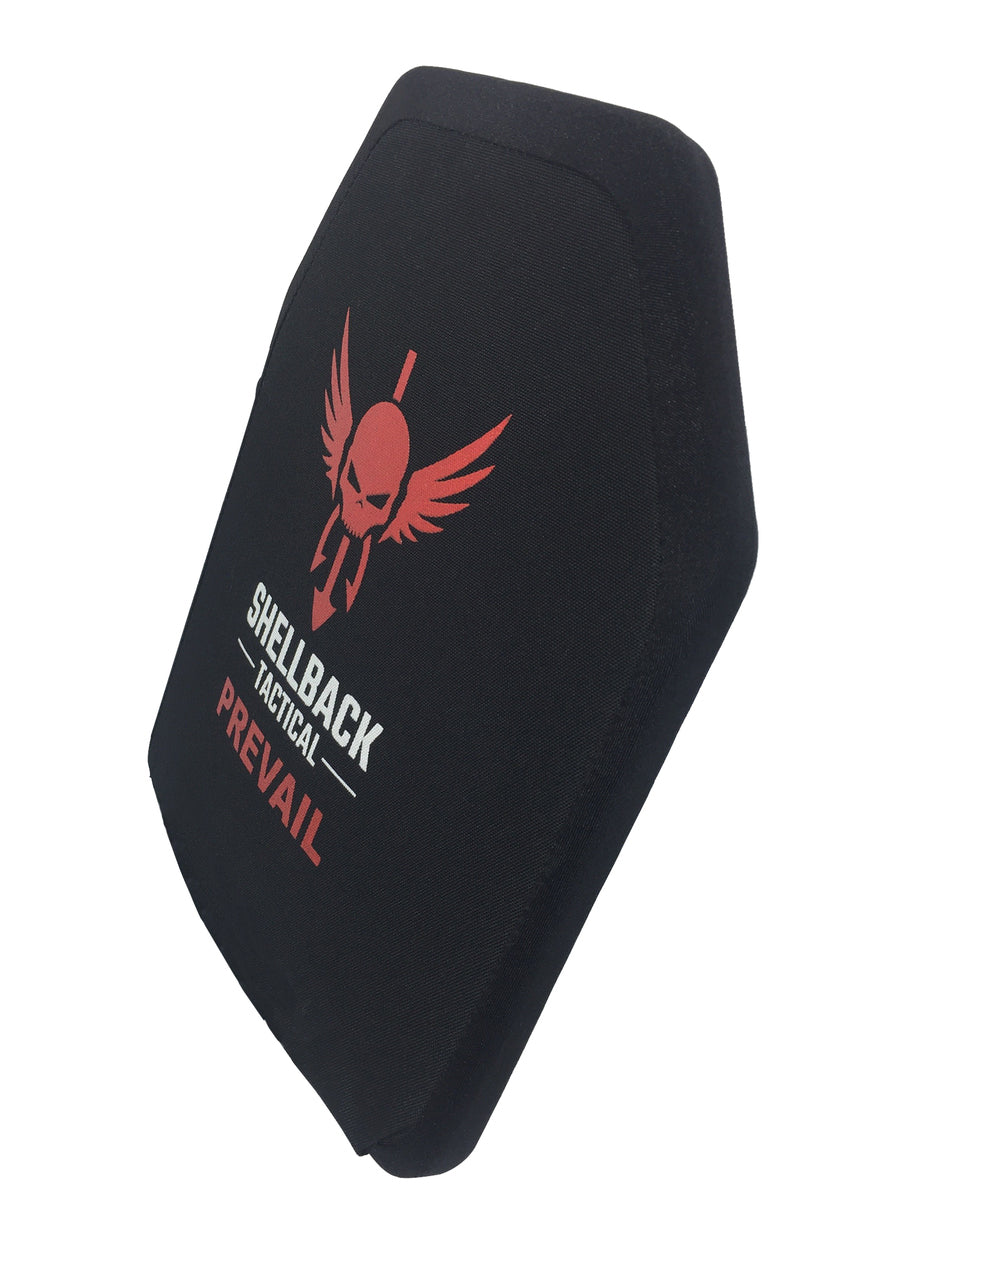 A Shellback Tactical Prevail Series Level IV Single Curve 10 x 12 Hard Armor Plate - Model 1155 with a red logo on it.